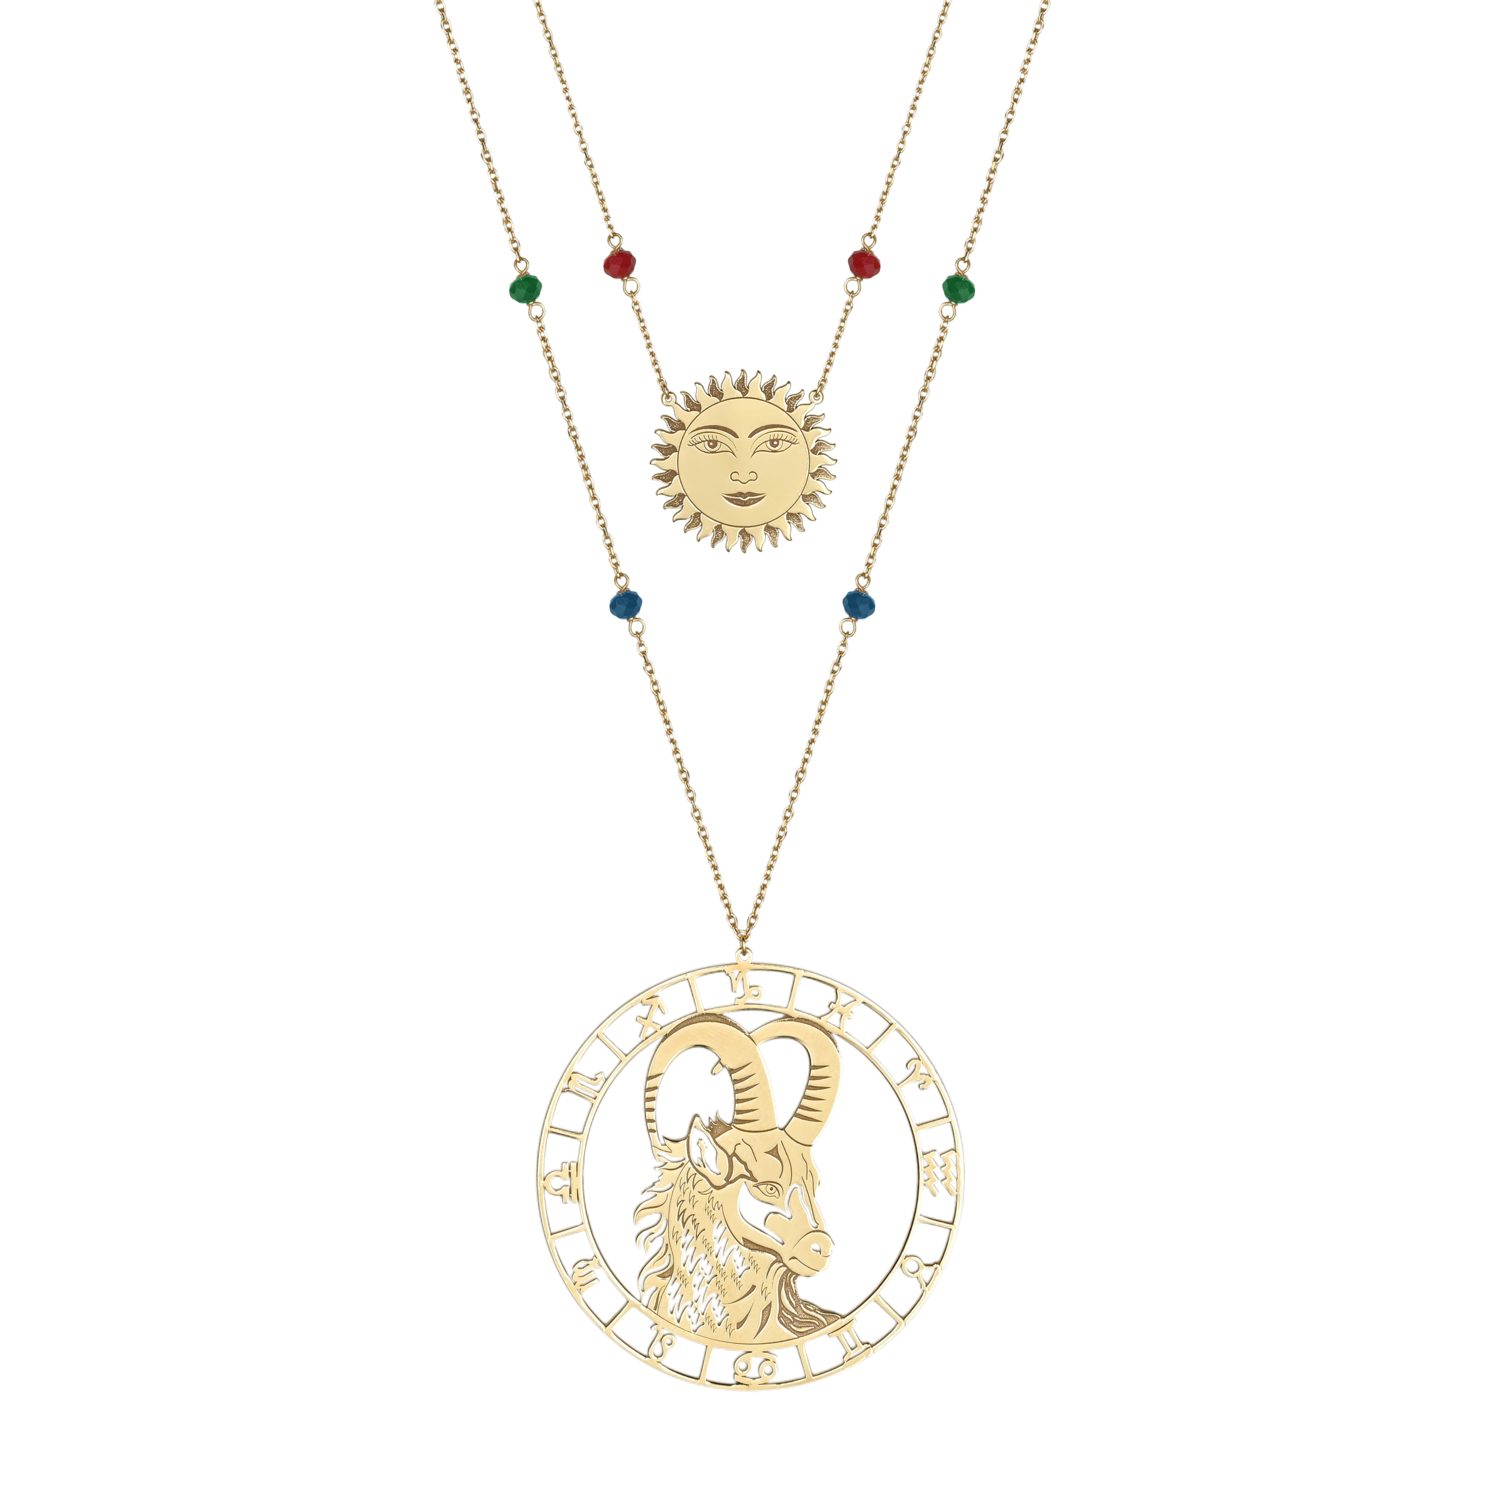 Zodiac Gold Capricorn Necklace with Sun Face and Colored Stones